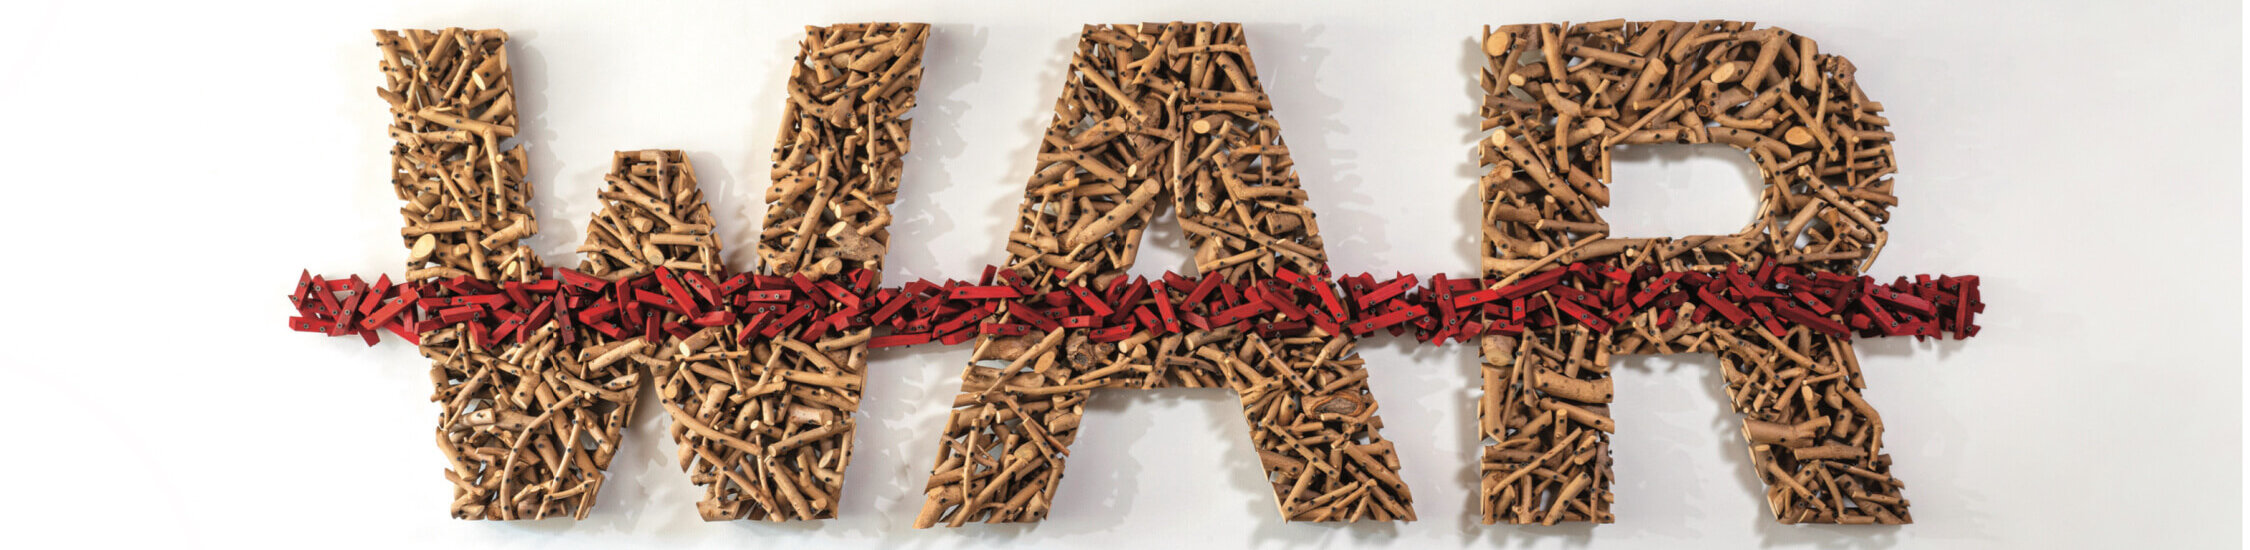 Gyöngy Laky, “Globalization III: Red Ink”, 2005. Ash Branches, Commercial Wood, Paint, and Screws, 32 in. x 106.5 in. x 4 in.